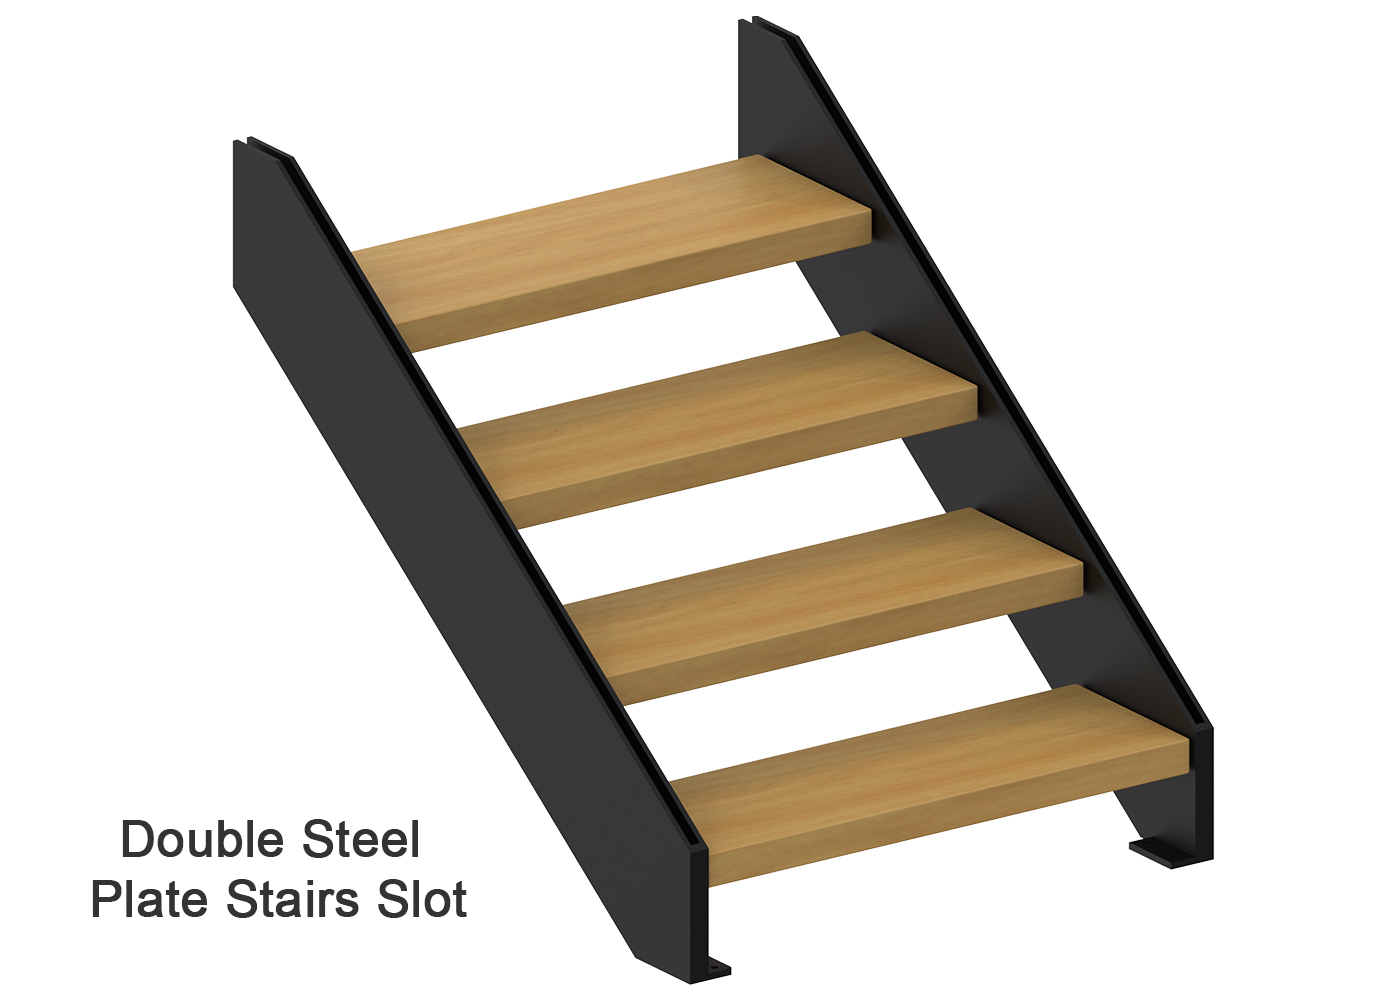 Double Steel Plate Stairs Slot